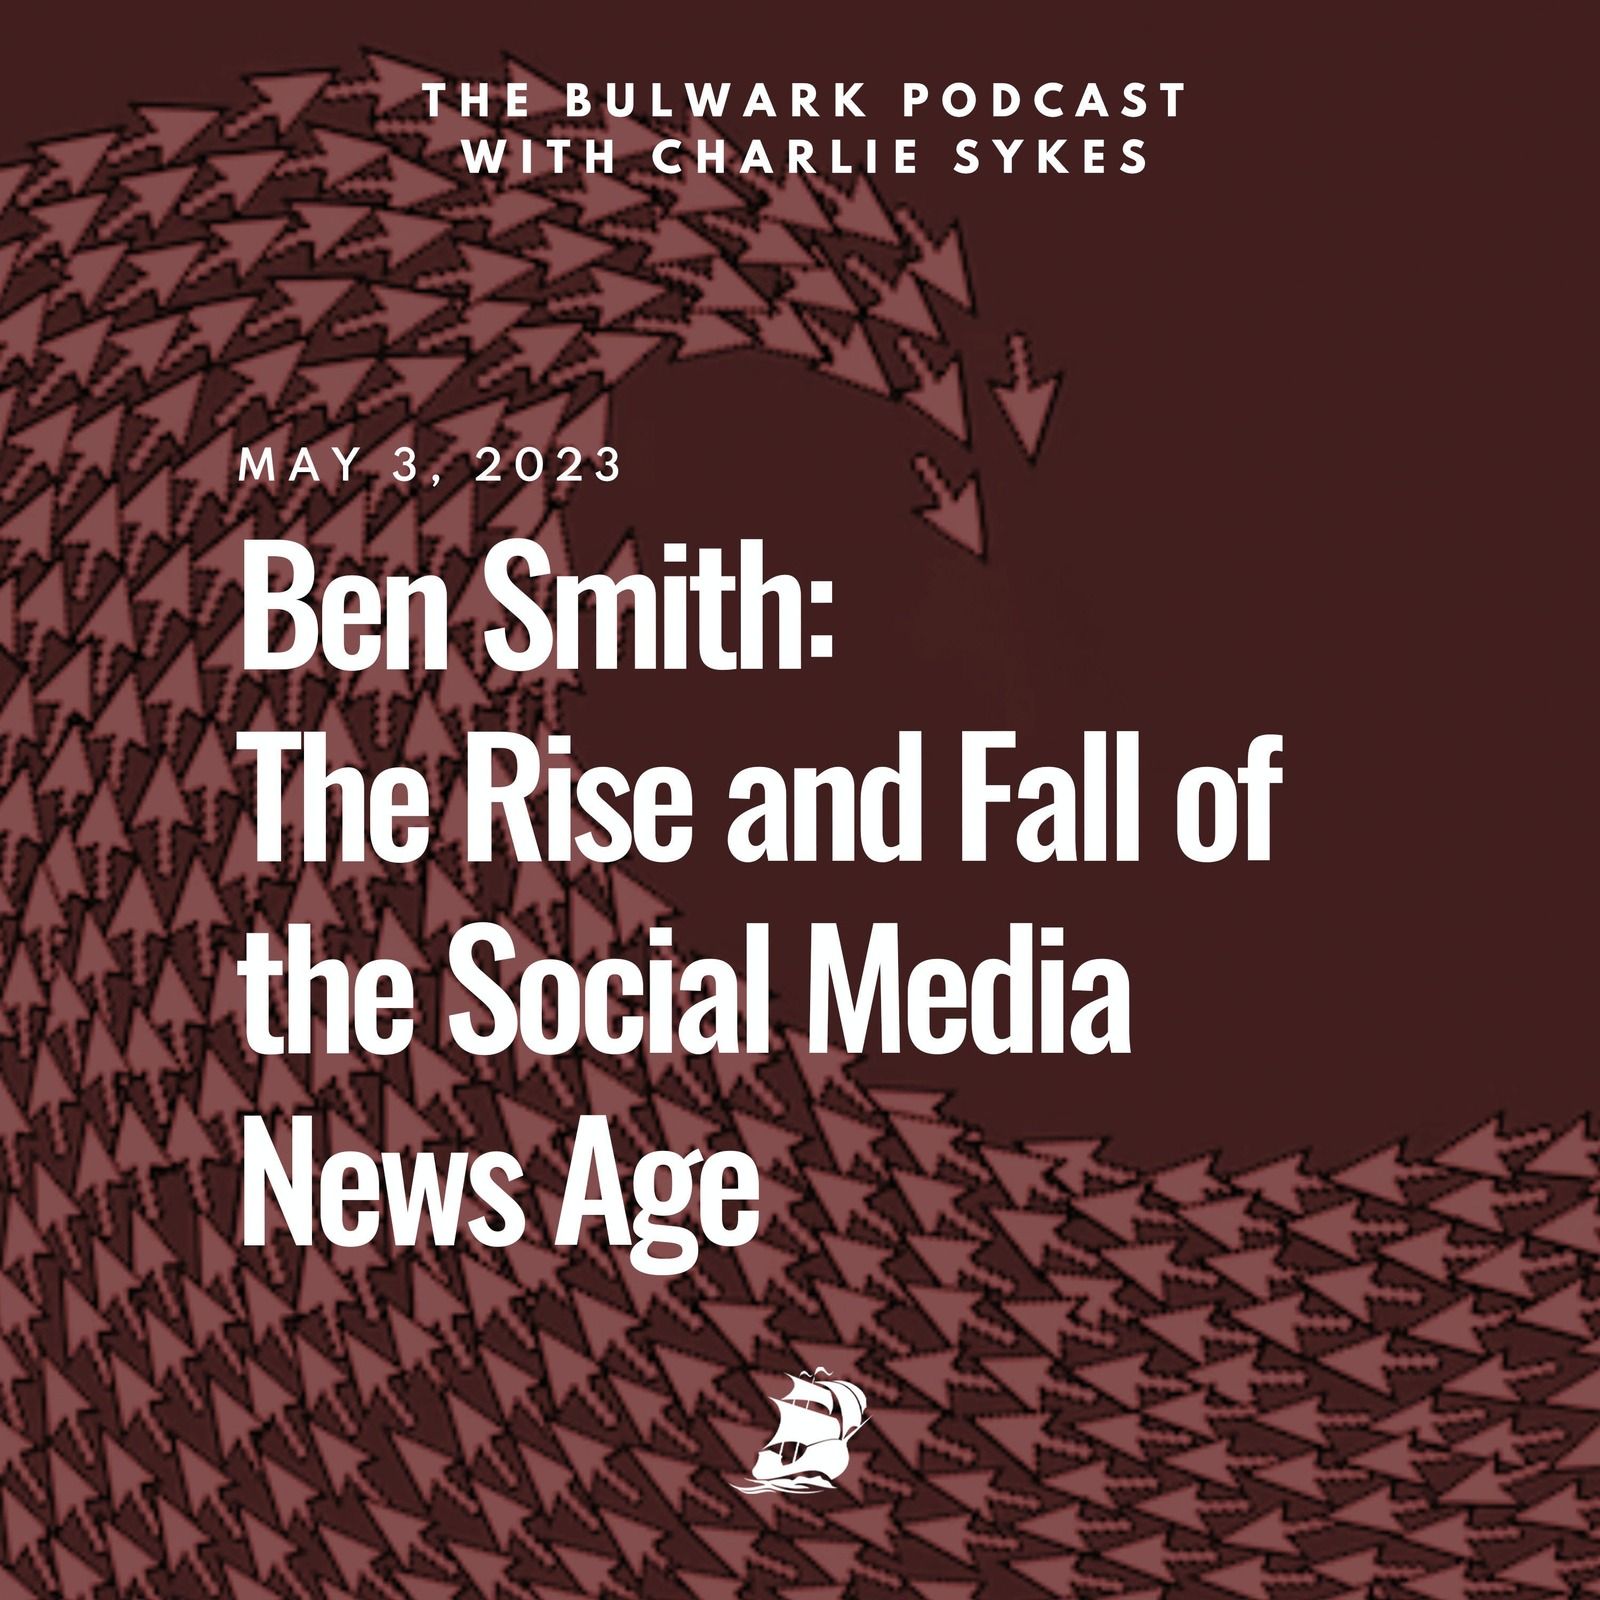 Ben Smith: The Rise and Fall of the Social Media News Age